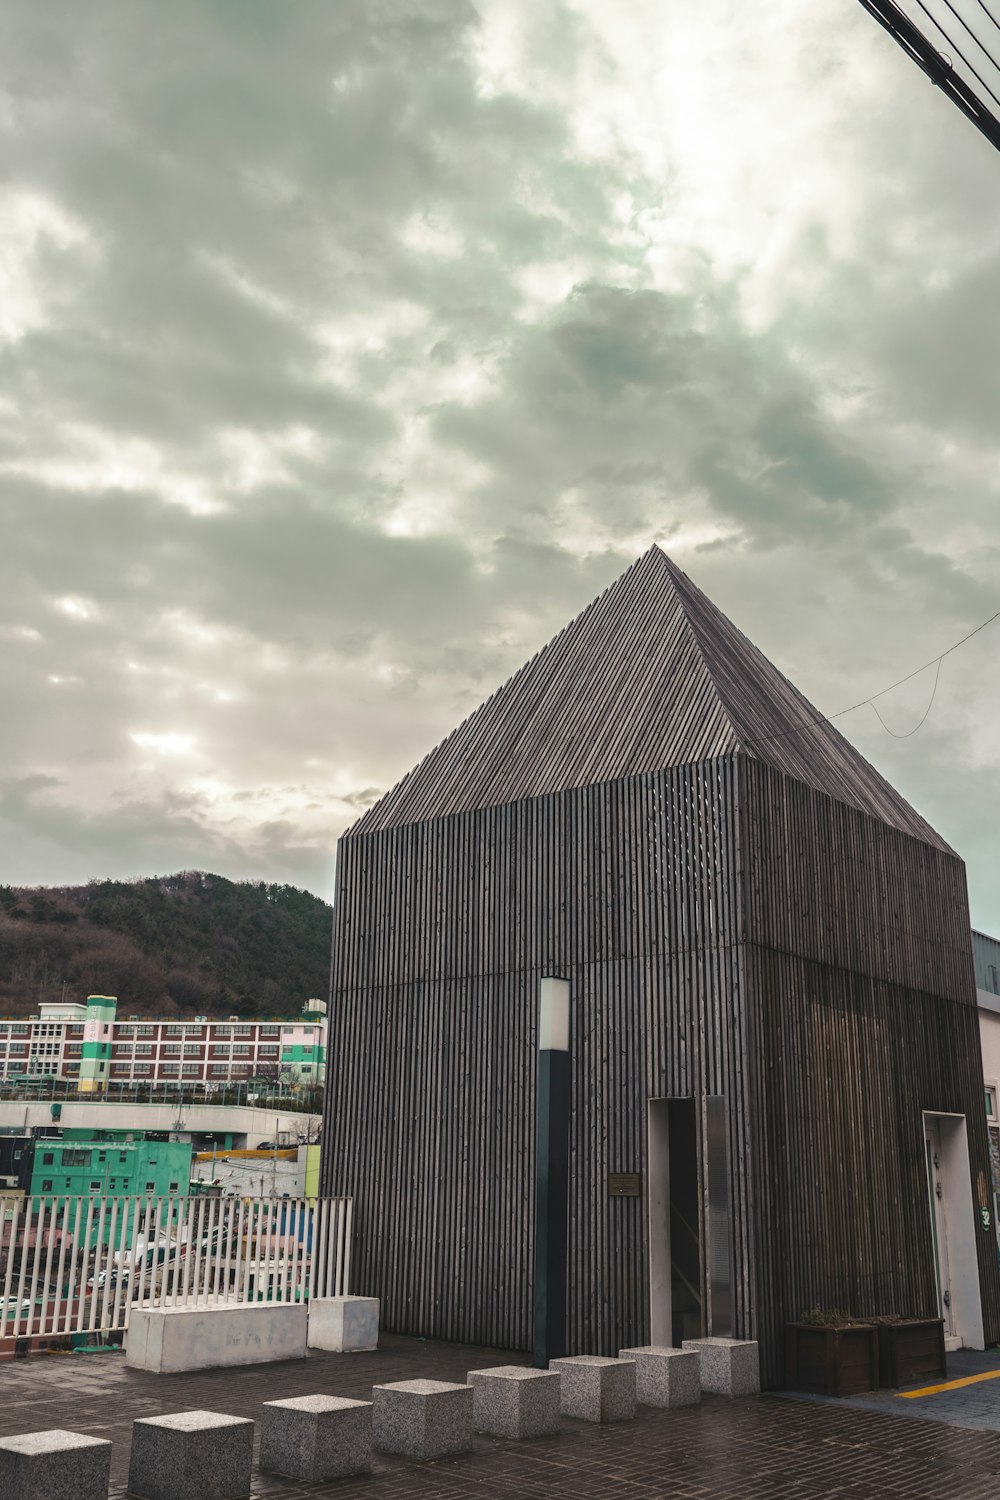 Gamcheon Culture Village Pictures Download Free Images On Unsplash